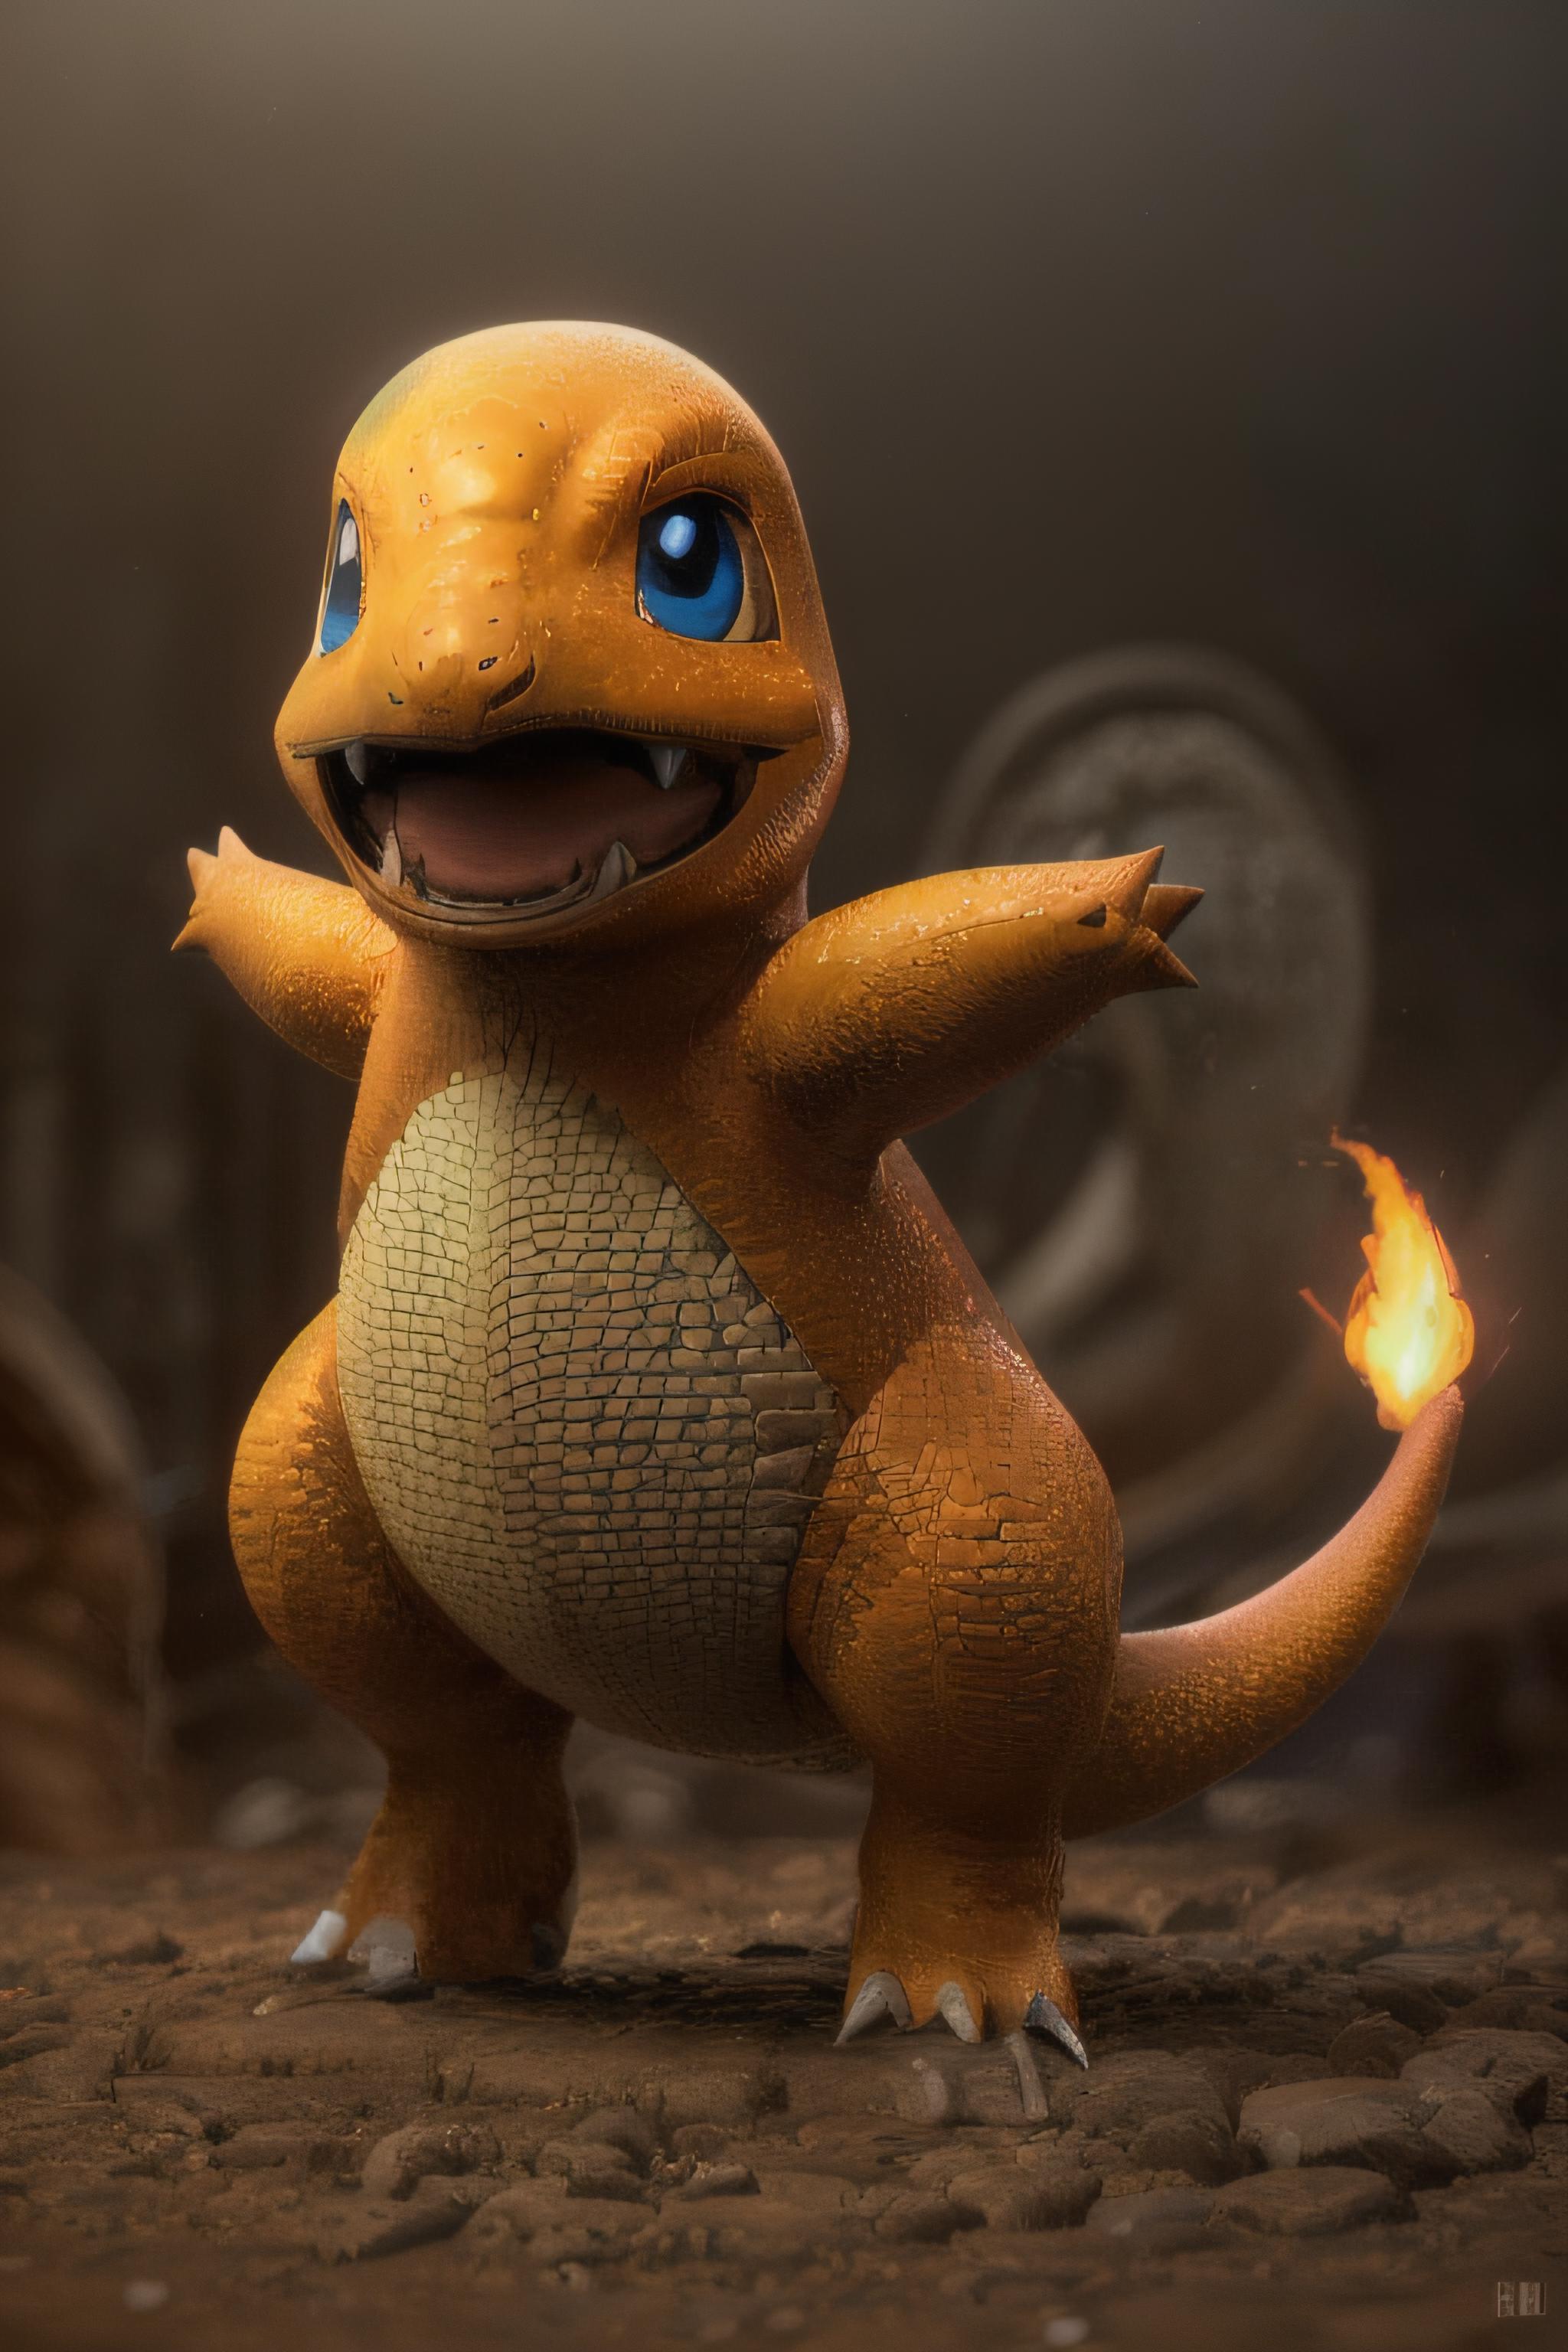 A cartoon orange and white character, possibly a Pokemon, with a fiery tail.